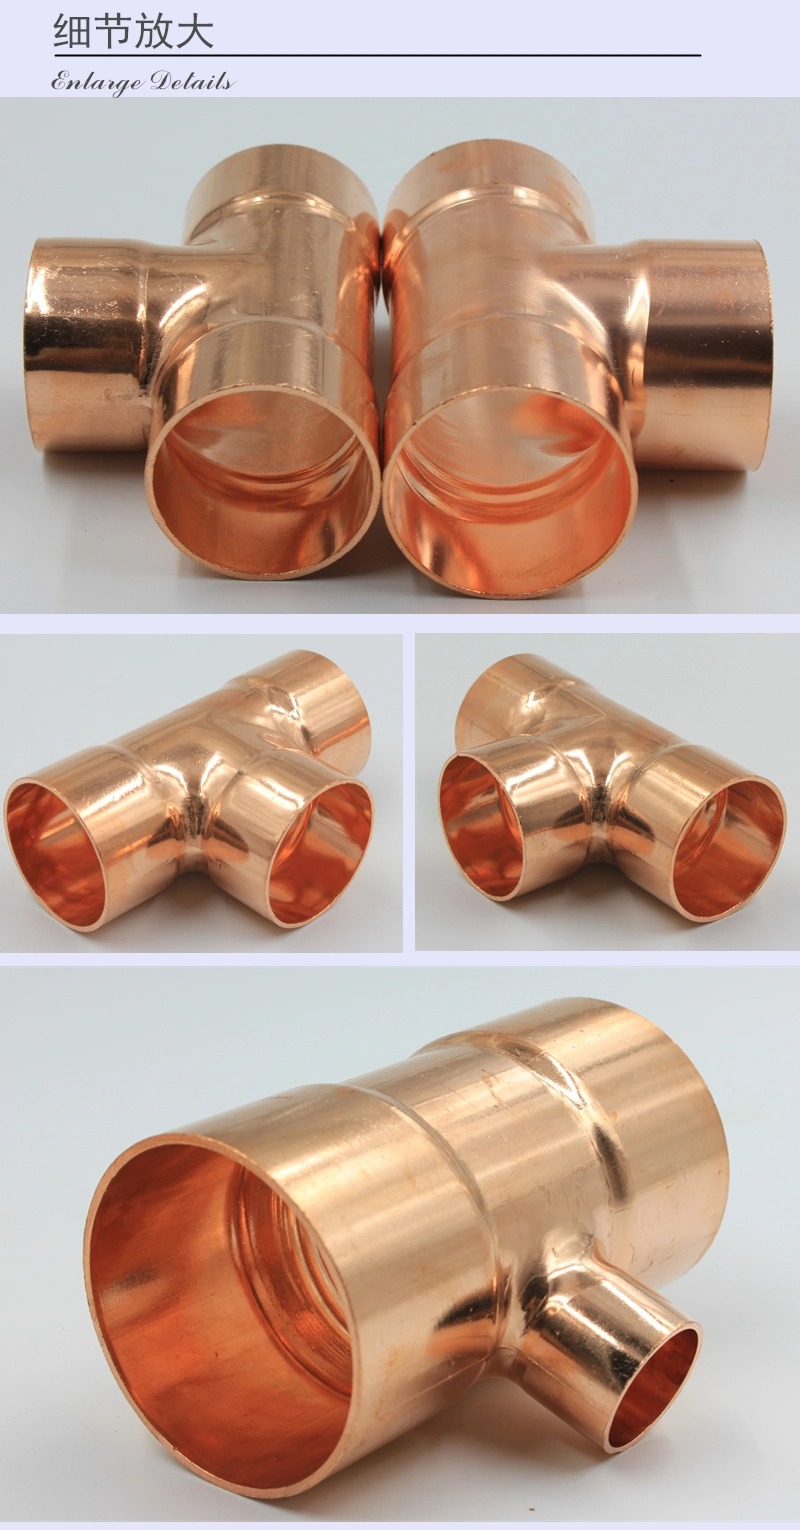 Copper Welded Socket Refrigeration Tube Fittings with Different Diameter Tee